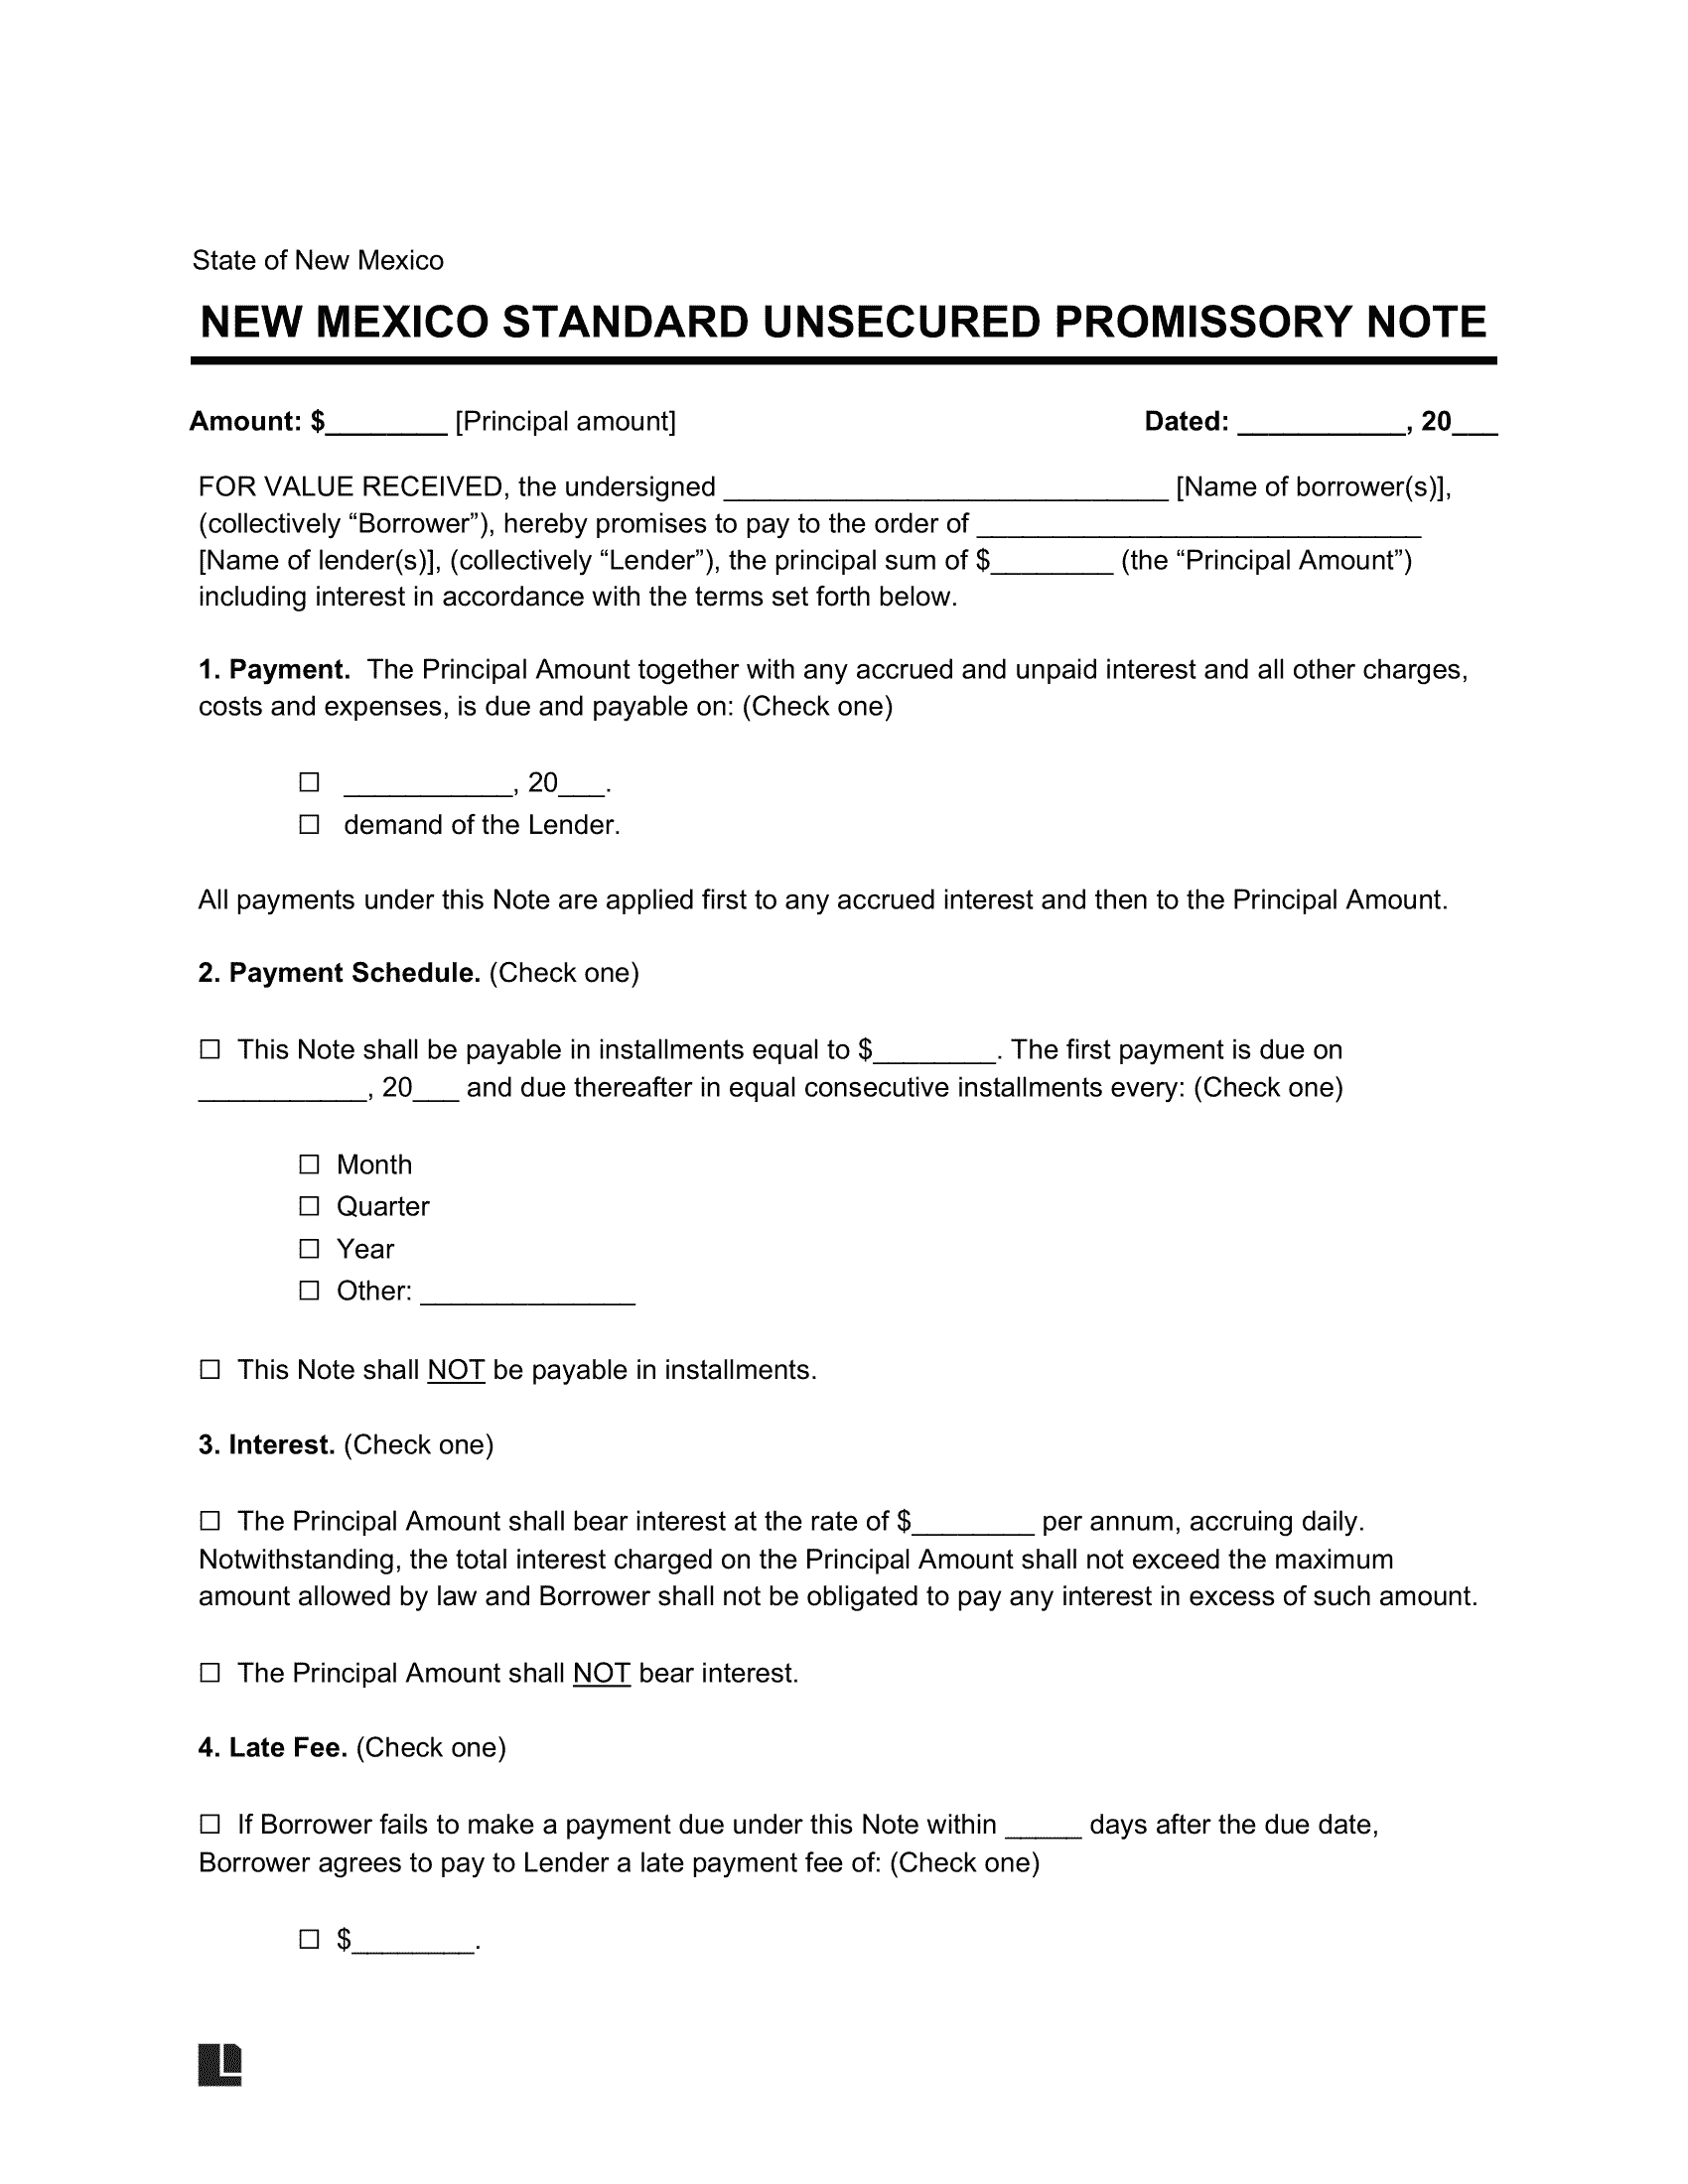 New Mexico Standard Unsecured Promissory Note Template